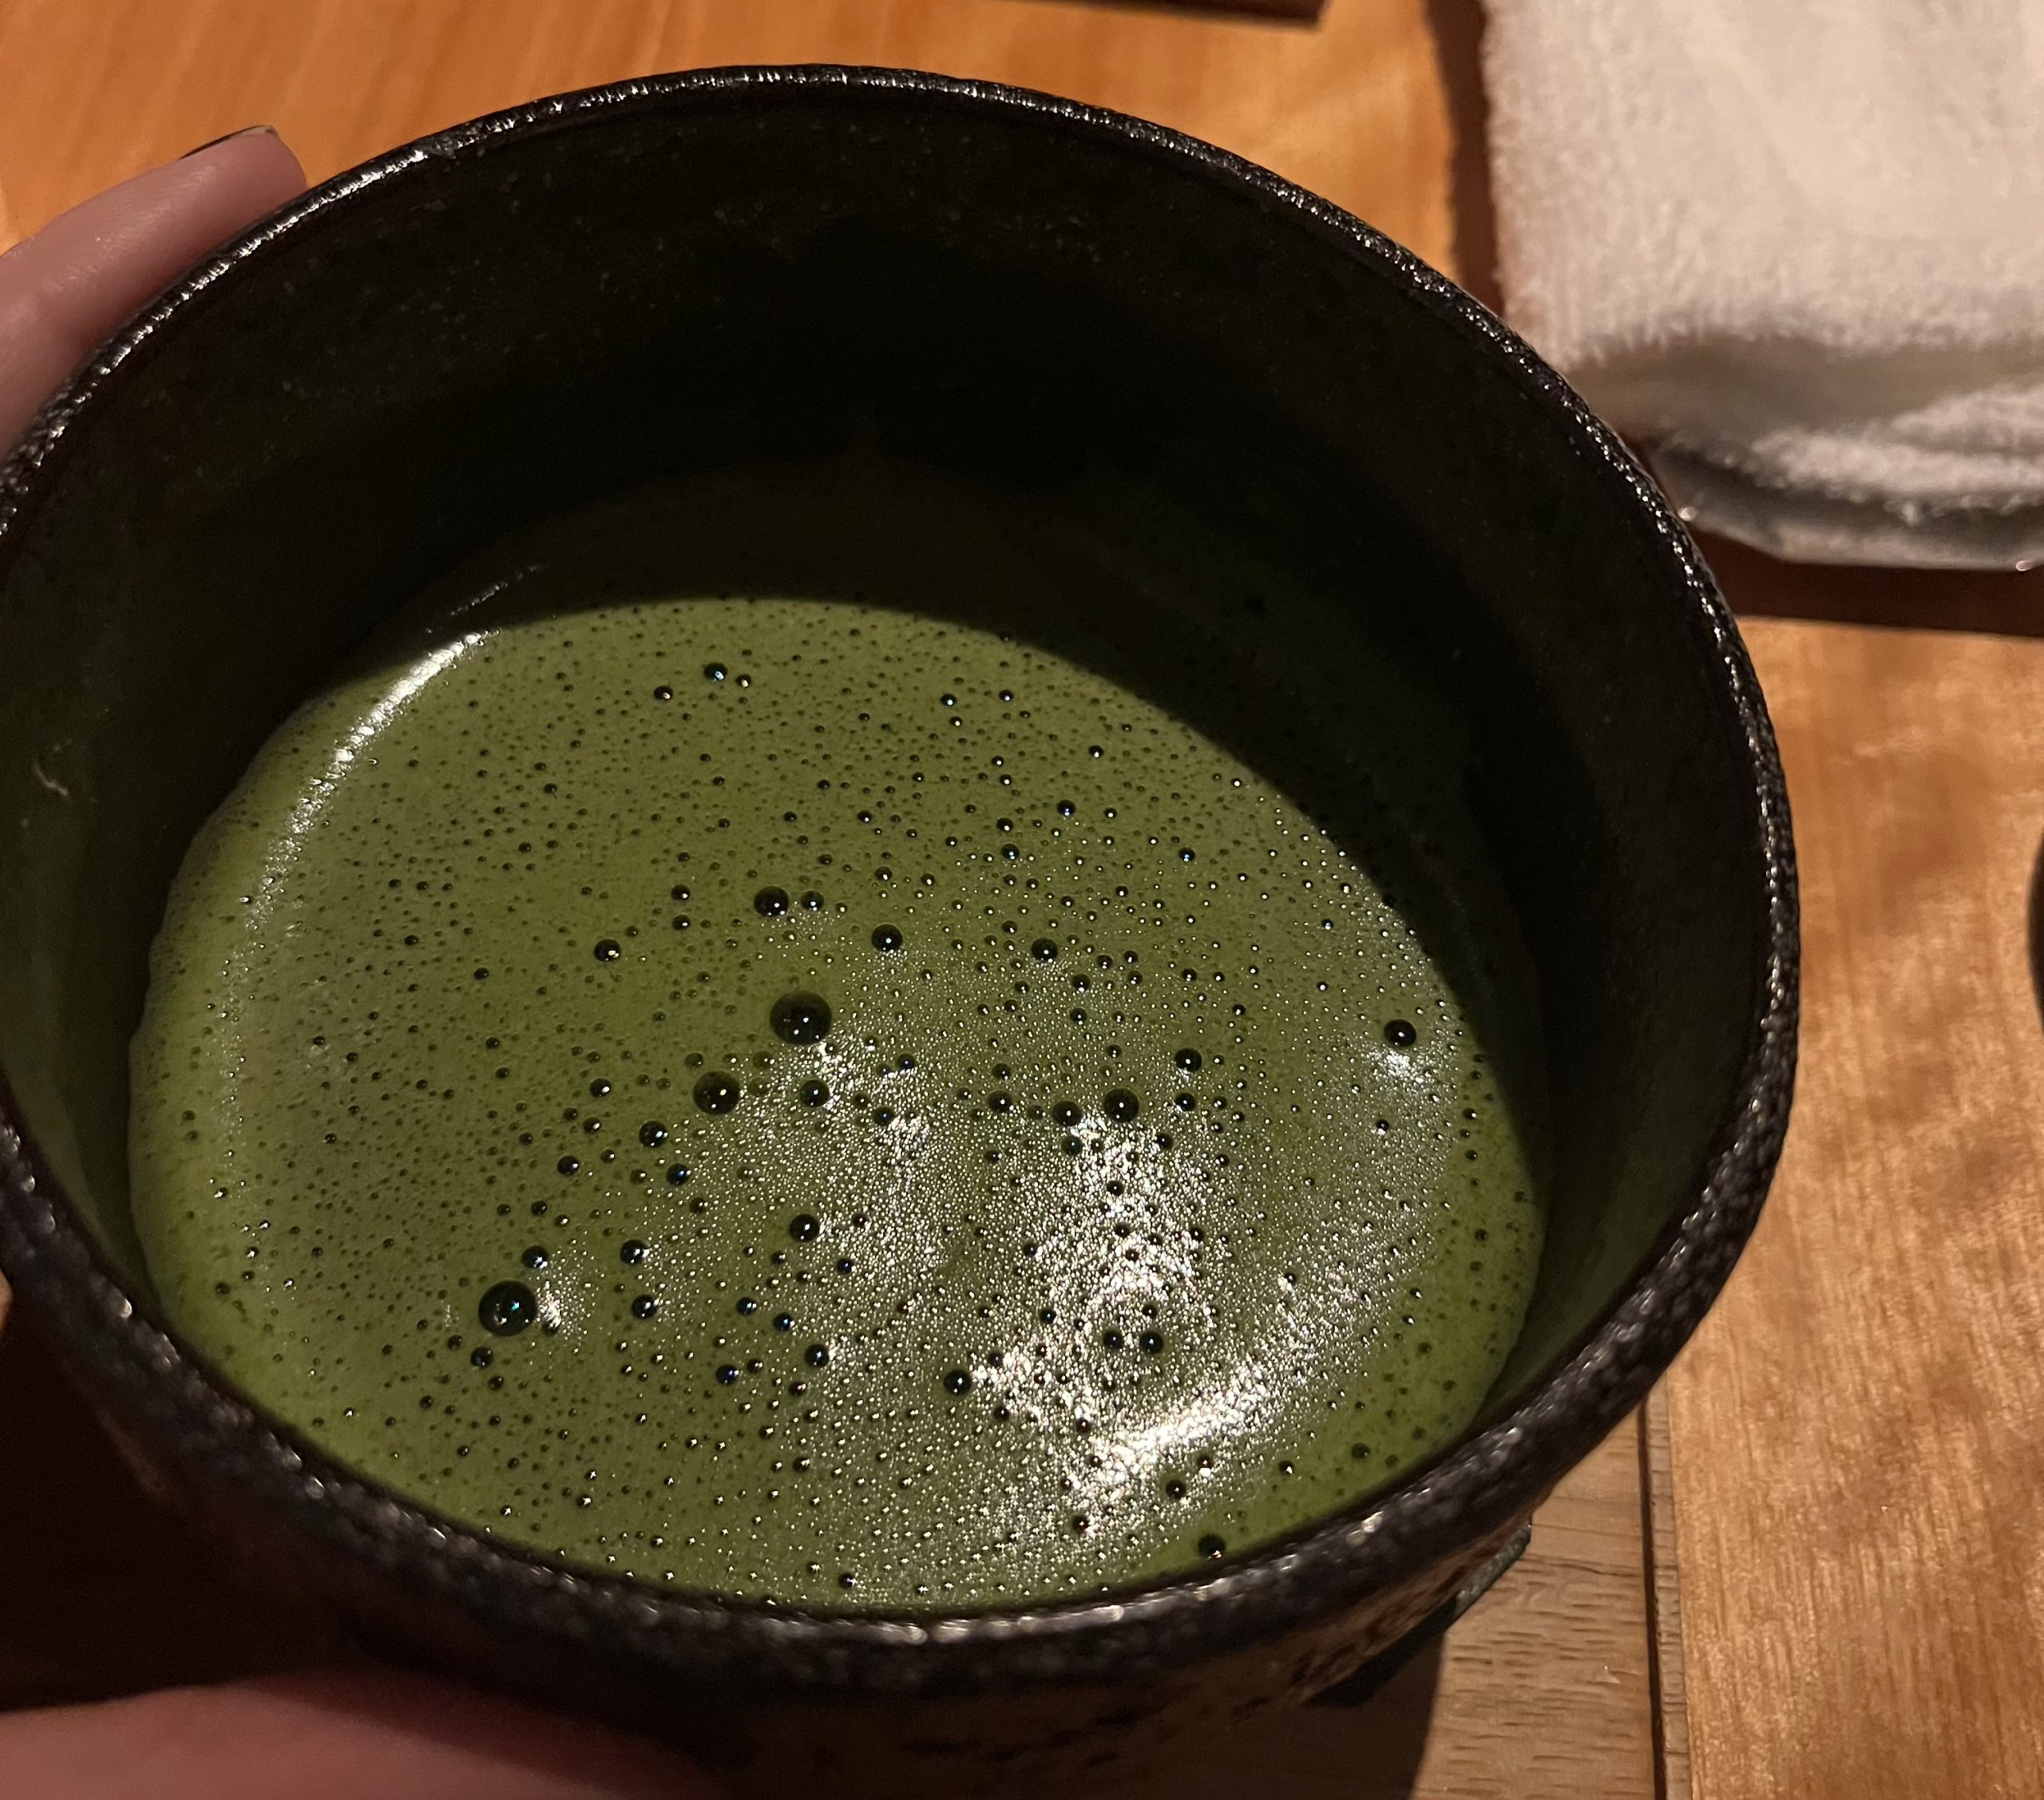 Delicious frothy matcha drink